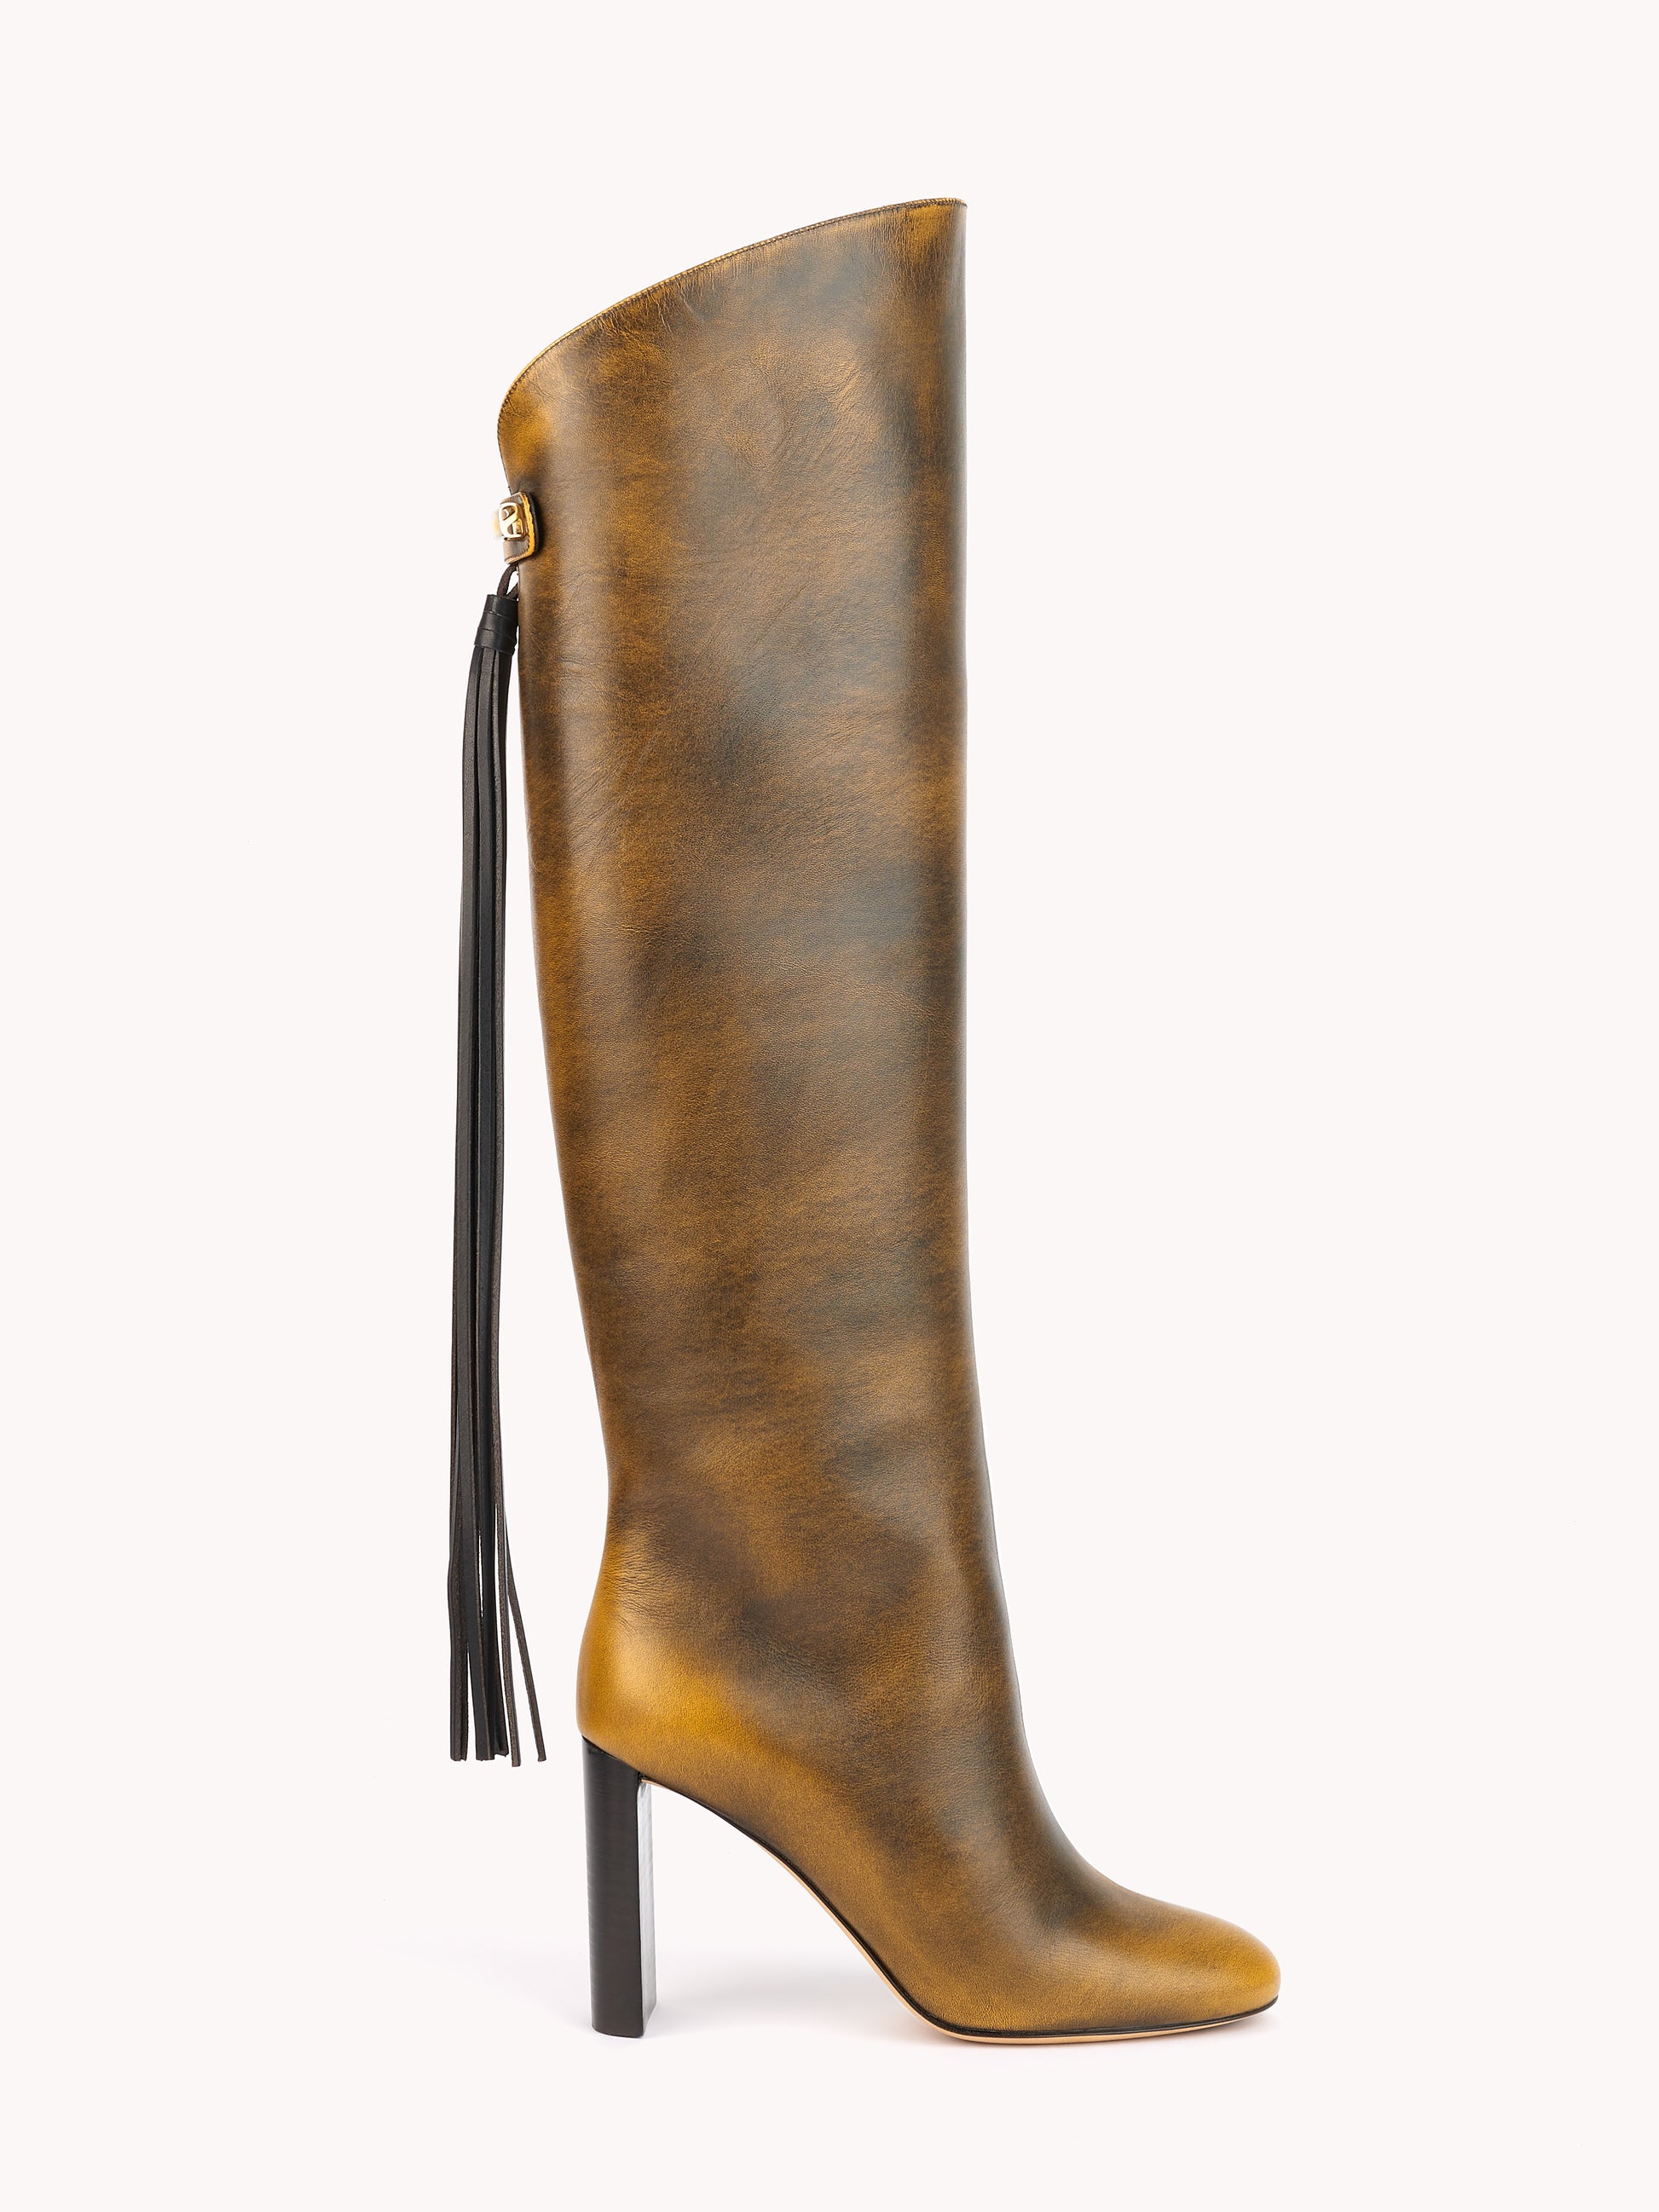 luxury equestrian golden brown leather high boots made in Italy skorpios